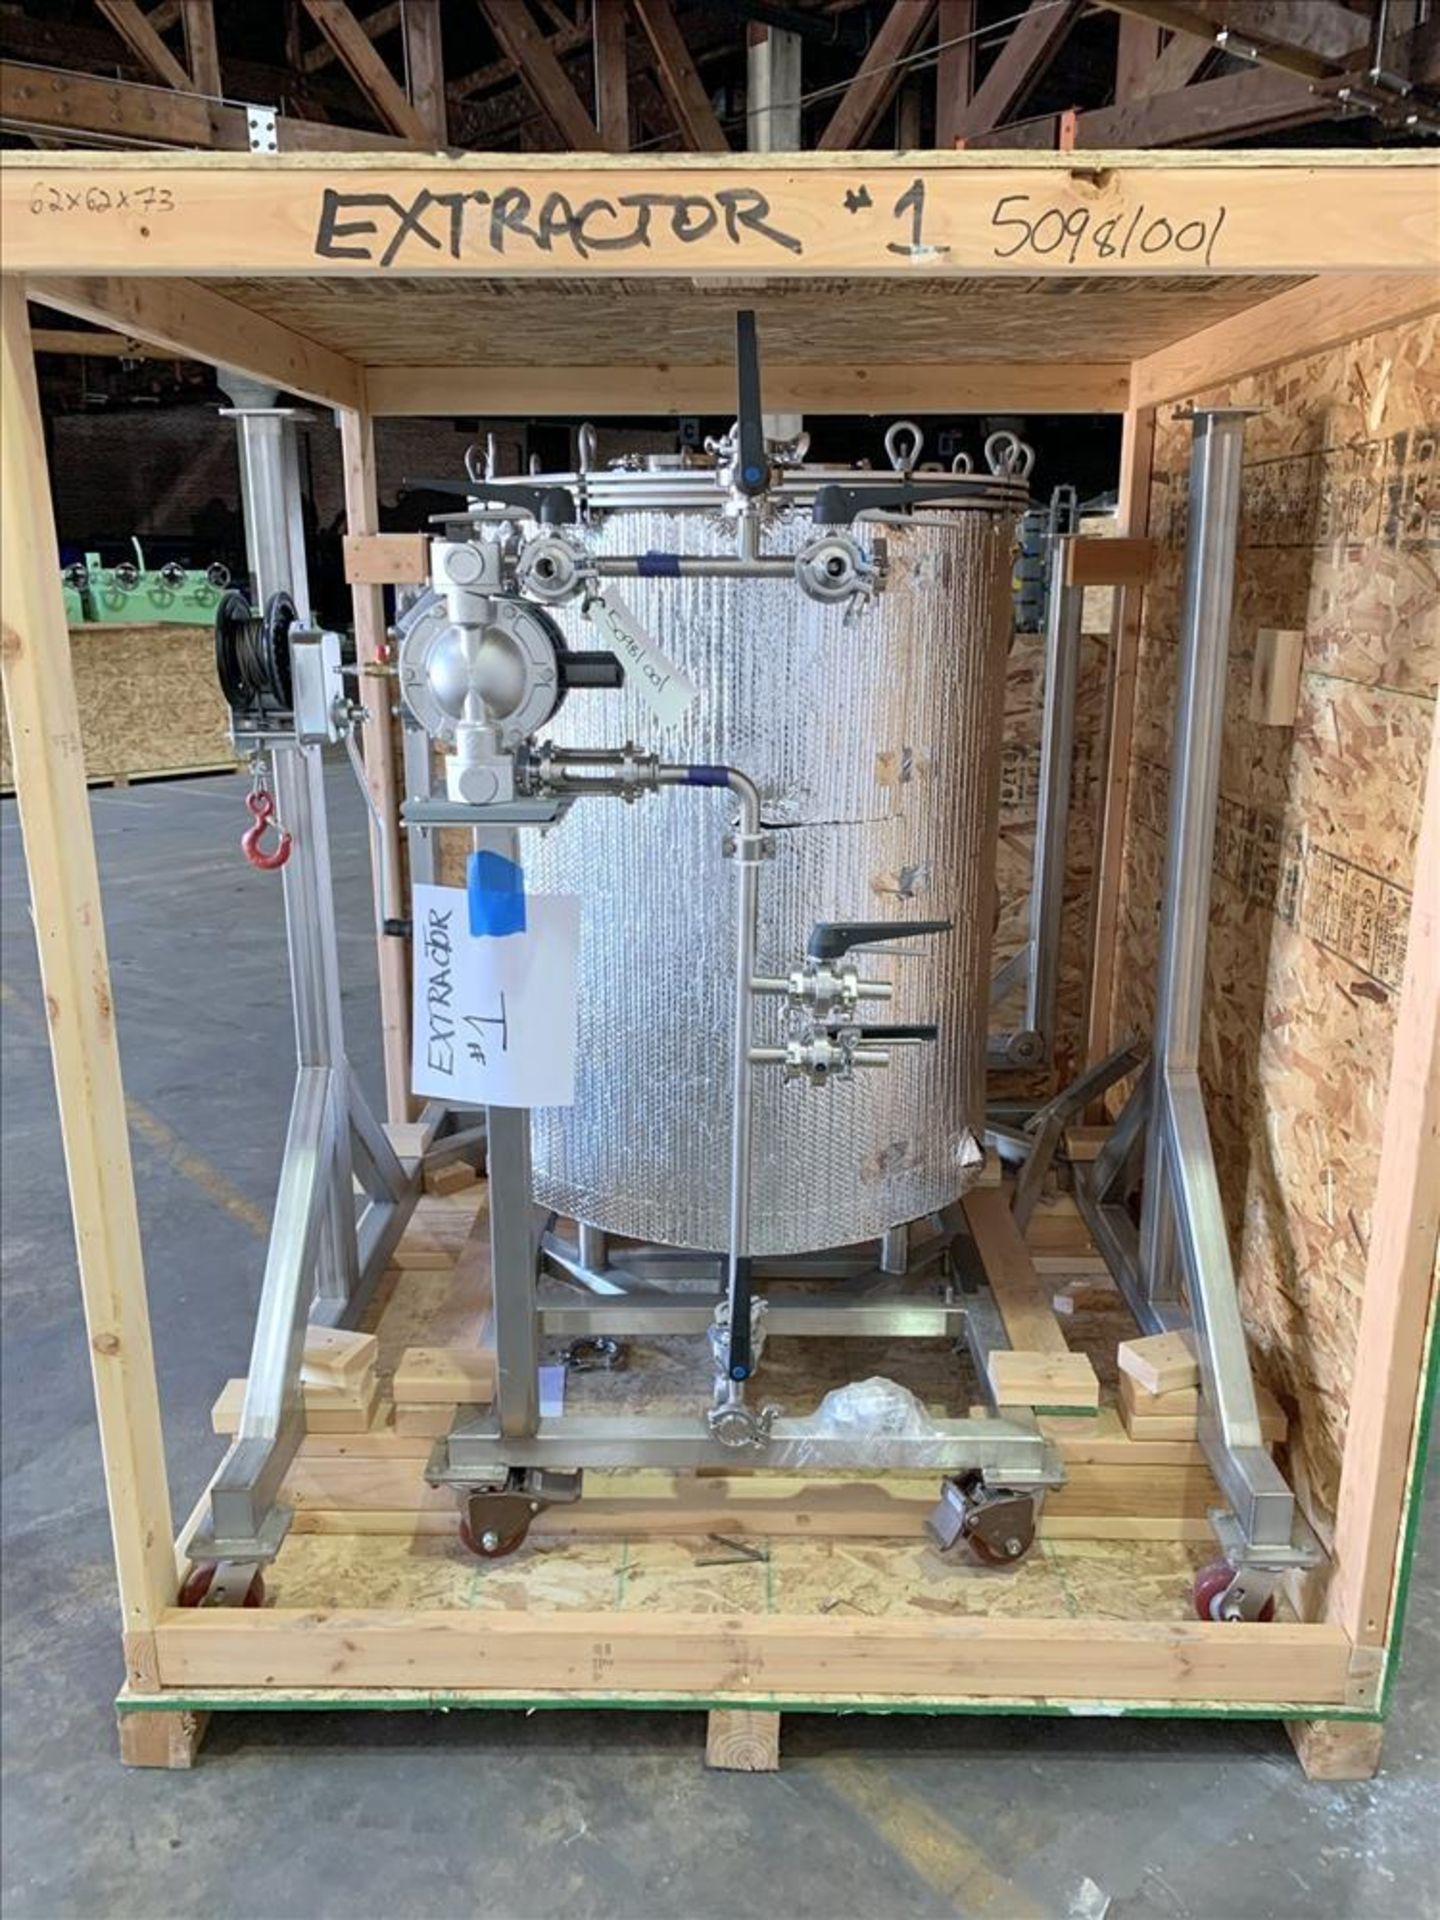 UNUSED - New In Crates - Eden Labs 3-Circuit Ethanol Platform Extraction & Solvent Recovery System - Image 51 of 152